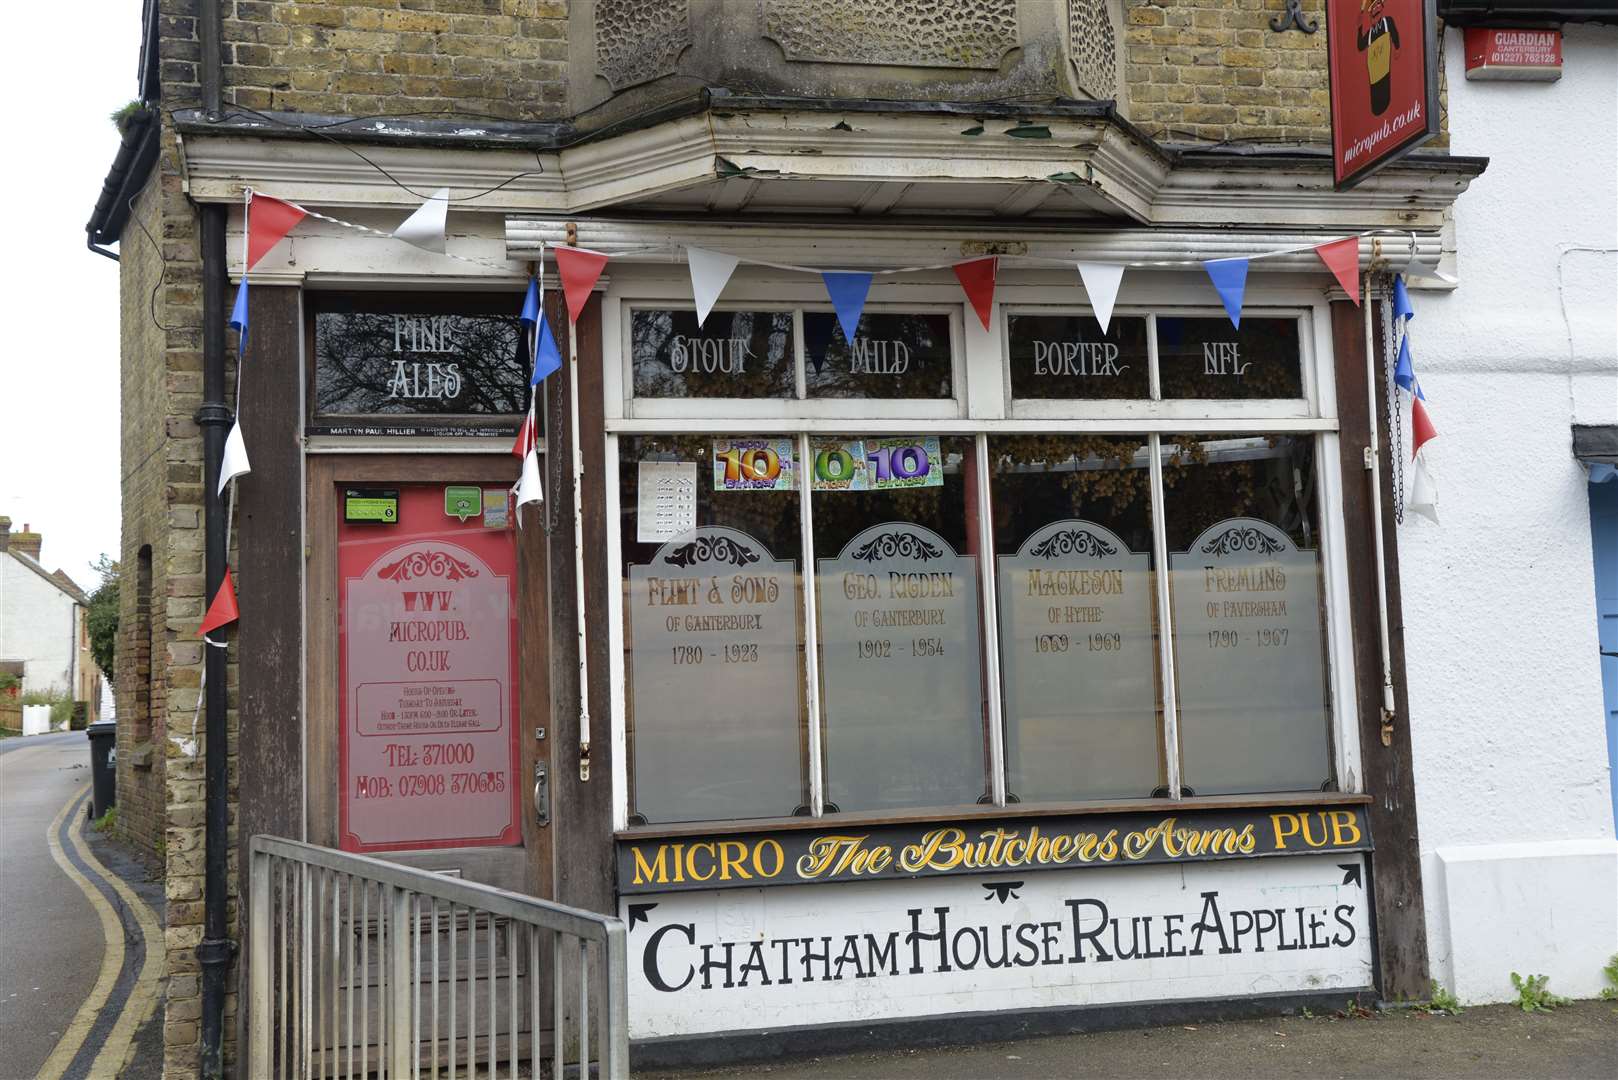 The Butcher's Arms in Herne was the first micropub to open in the UK